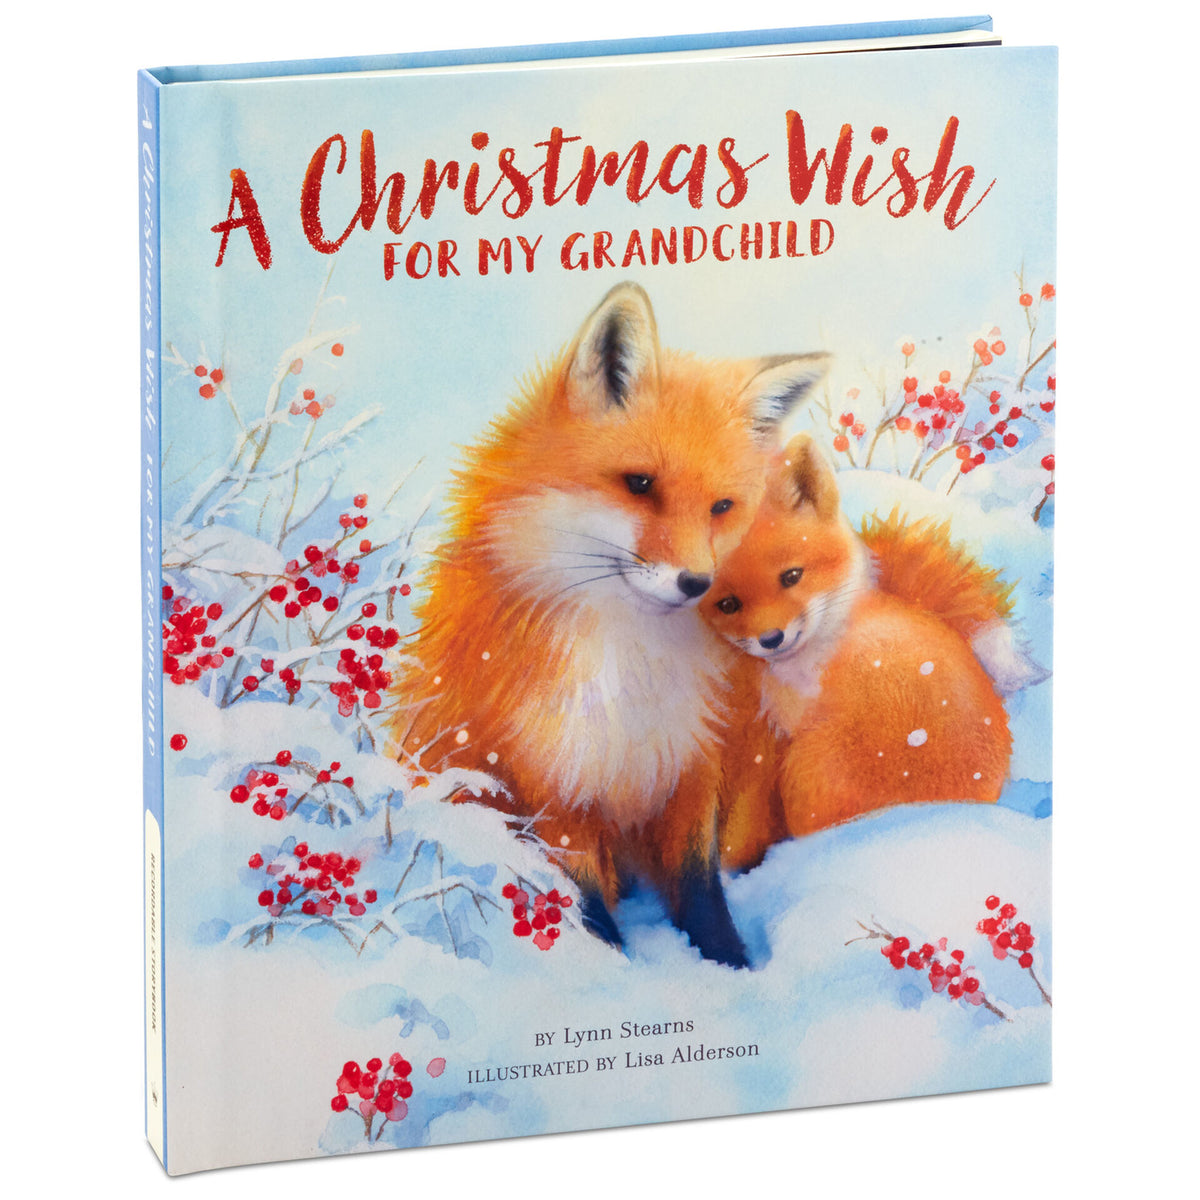 Christmas　Storybook　A　Recordable　—　Wish　My　for　Grandchild　Trudy's　Hallmark